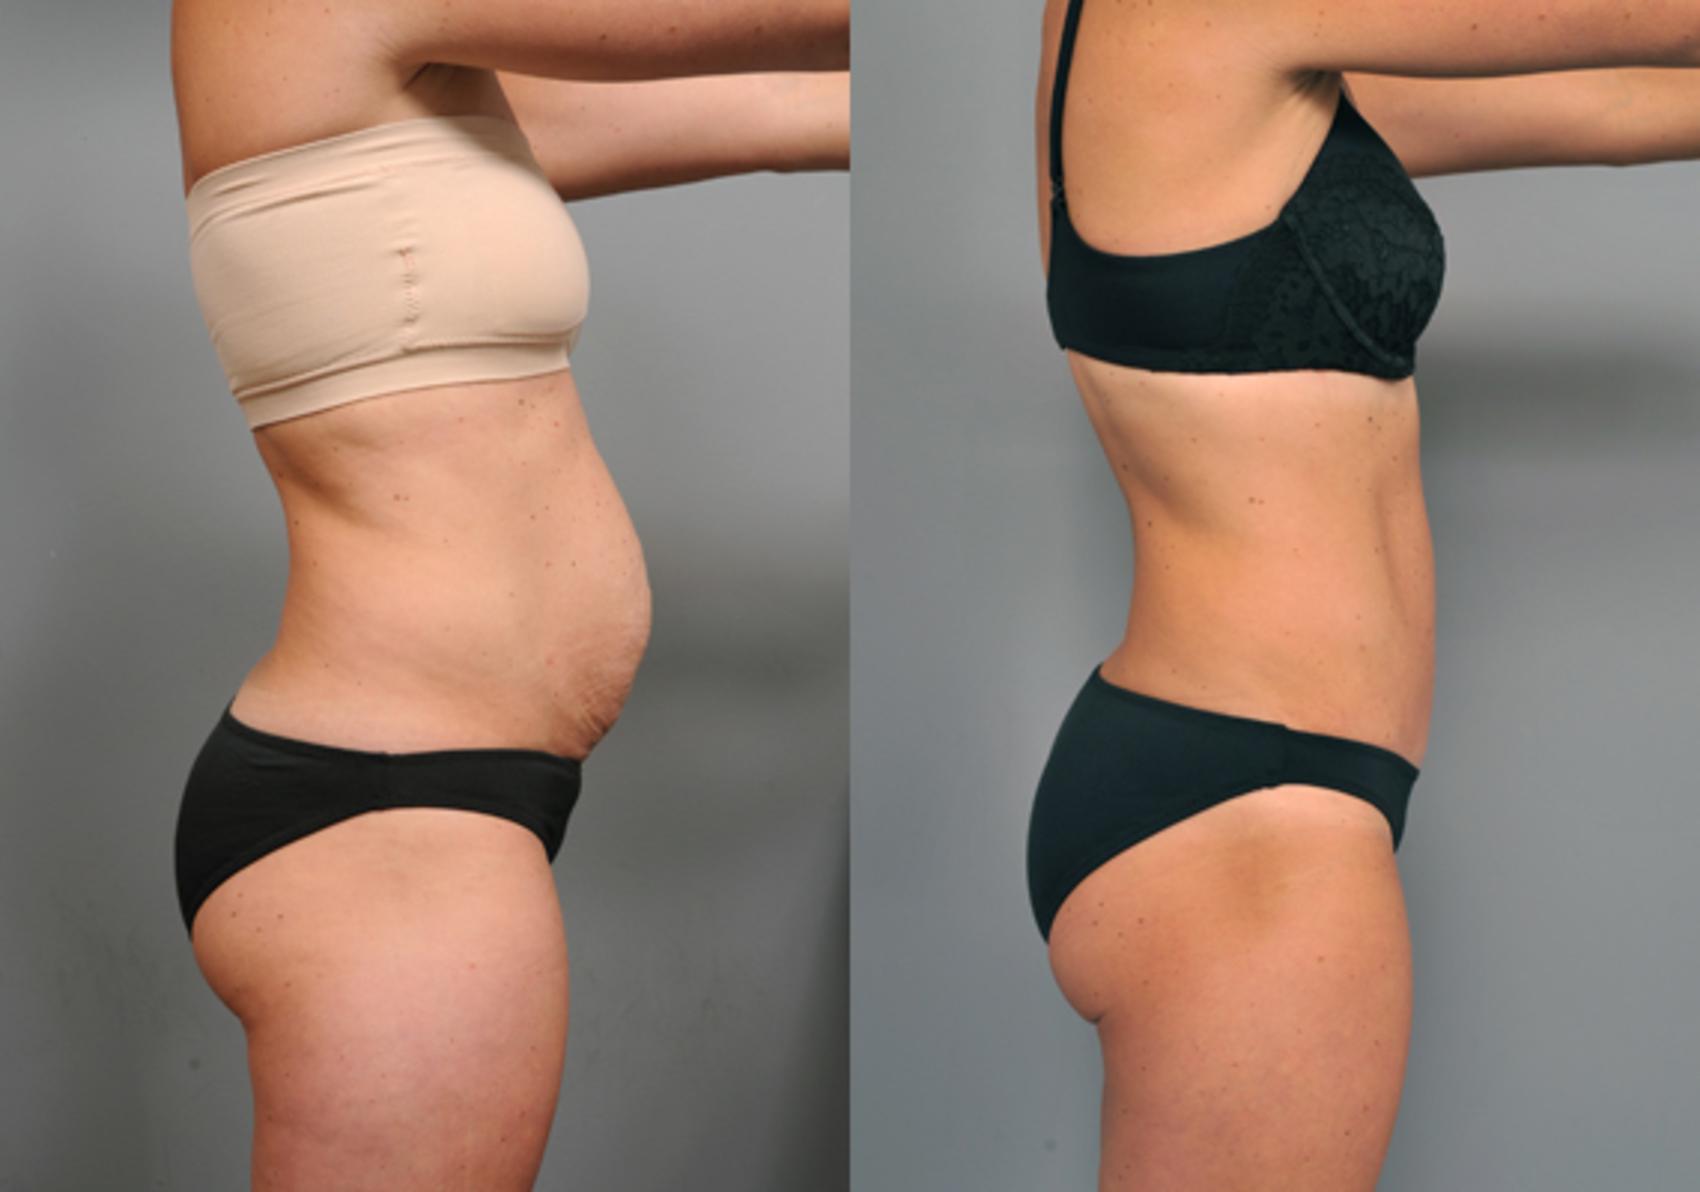 Tummy Tuck after Weight Loss in Brooklyn, NY. Cost, insurance coverage,  benefits, and the importance of choosing a skilled surgeon